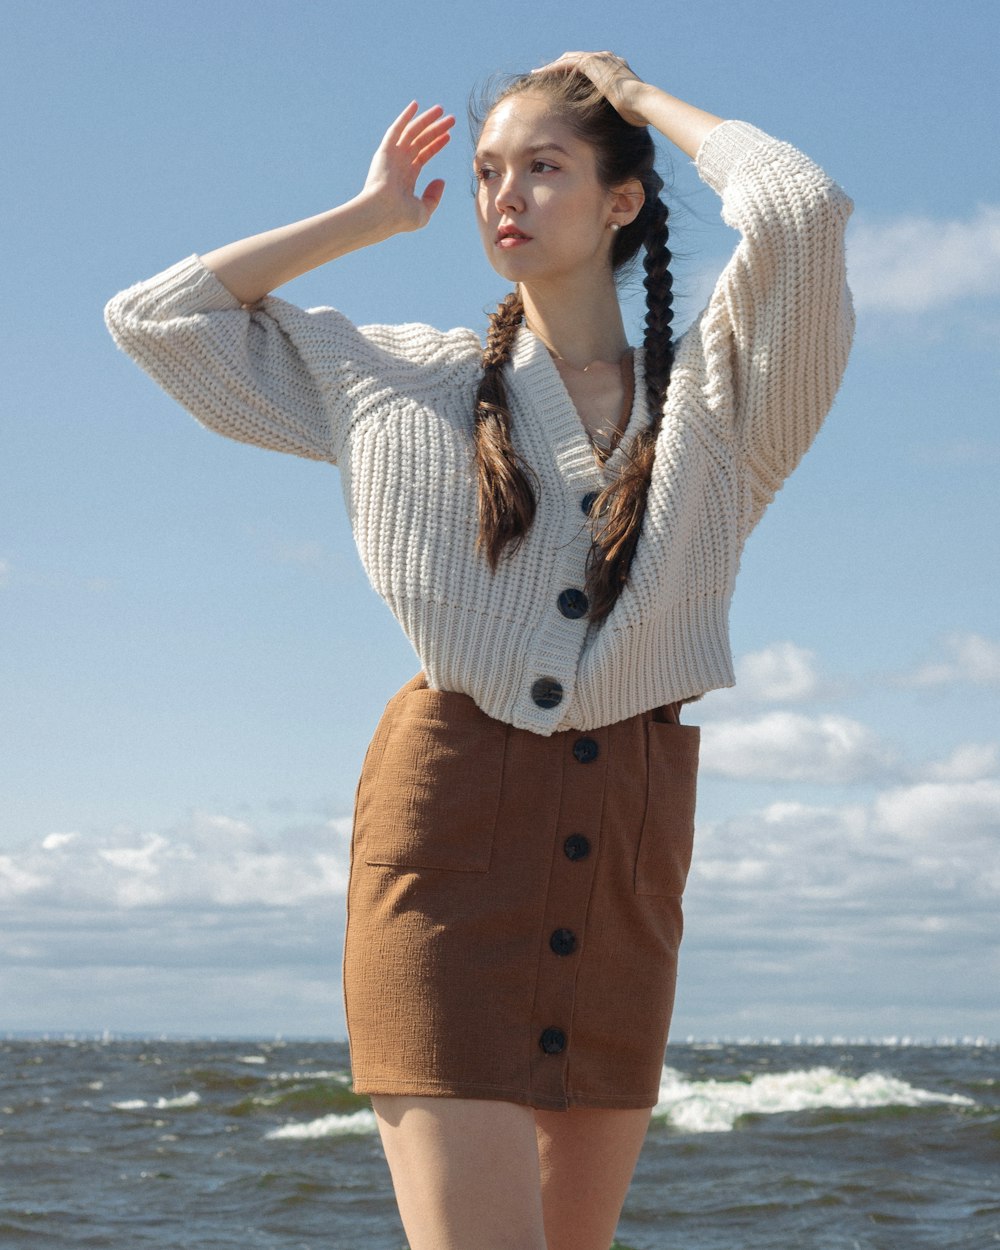 woman in white and black striped long sleeve shirt and brown skirt standing on beach during